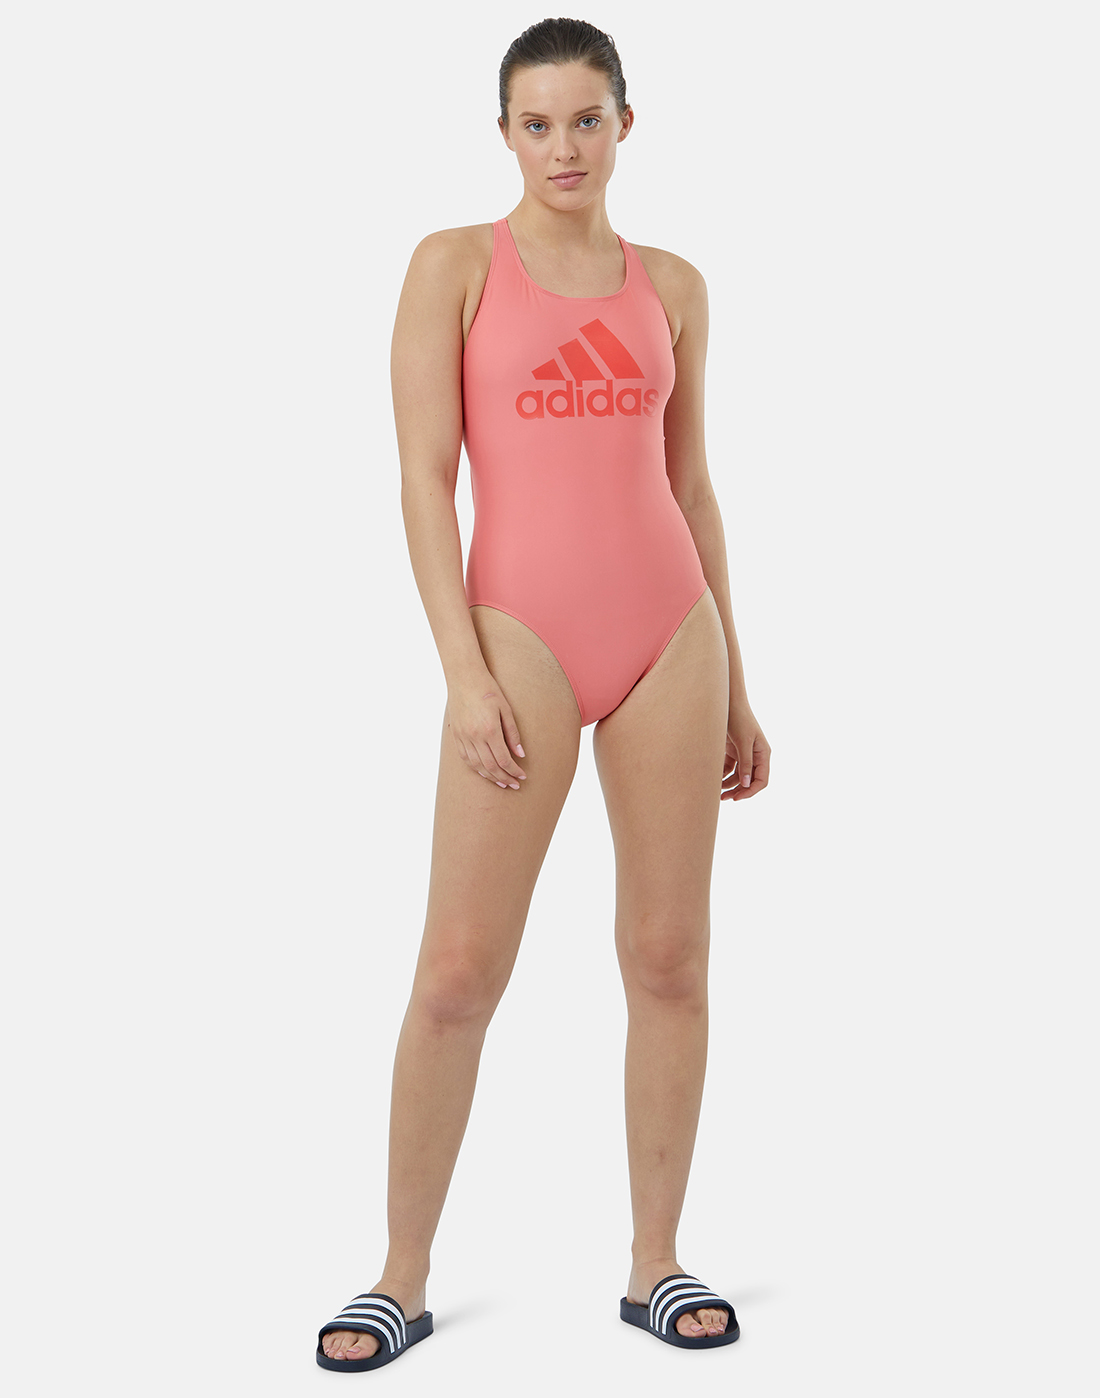 adidas Womens BOS 3 Stripes Swimsuit - Red